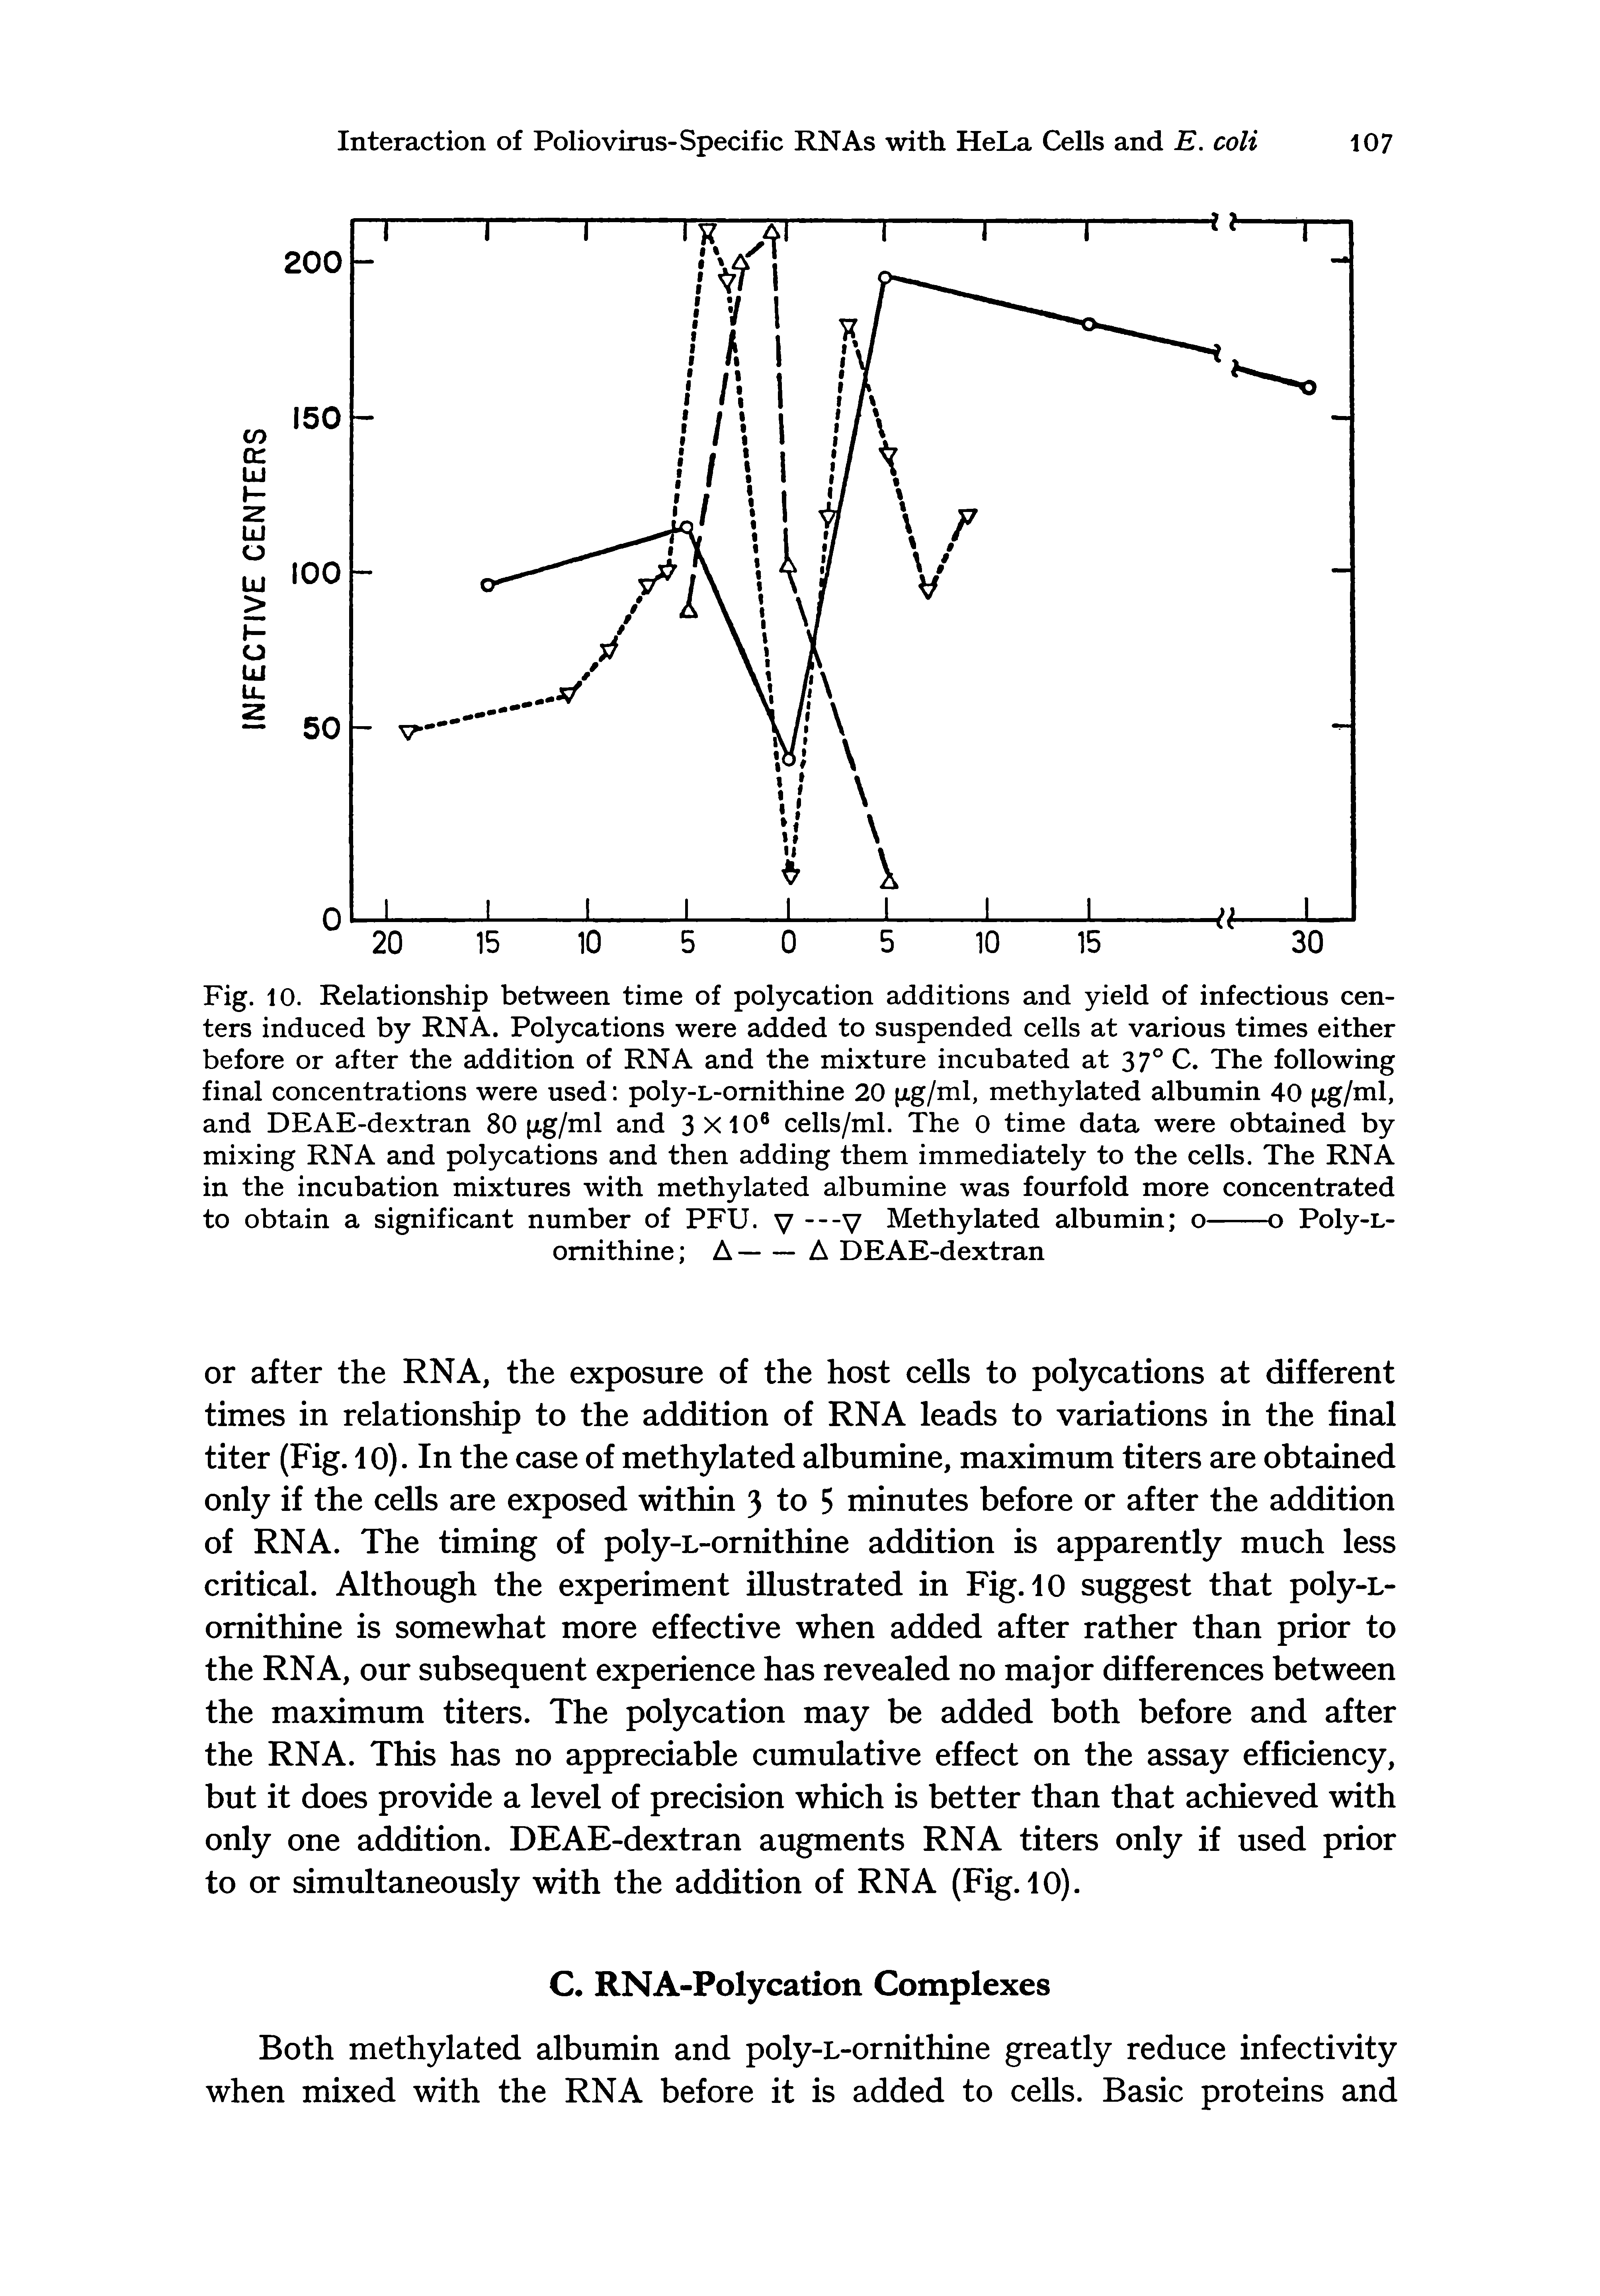 Fig. 10. Relationship between time of polycation additions and yield of infectious centers induced by RNA. Polycations were added to suspended cells at various times either before or after the addition of RNA and the mixture incubated at 37 C. The following final concentrations were used poly-L-omithine 20 (xg/ml, methylated albumin 40 xg/ml, and DEAE-dextran 80 [xg/ml and 3X10 cells/ml. The 0 time data were obtained by mixing RNA and polycations and then adding them immediately to the cells. The RNA in the incubation mixtures with methylated albumine was fourfold more concentrated...